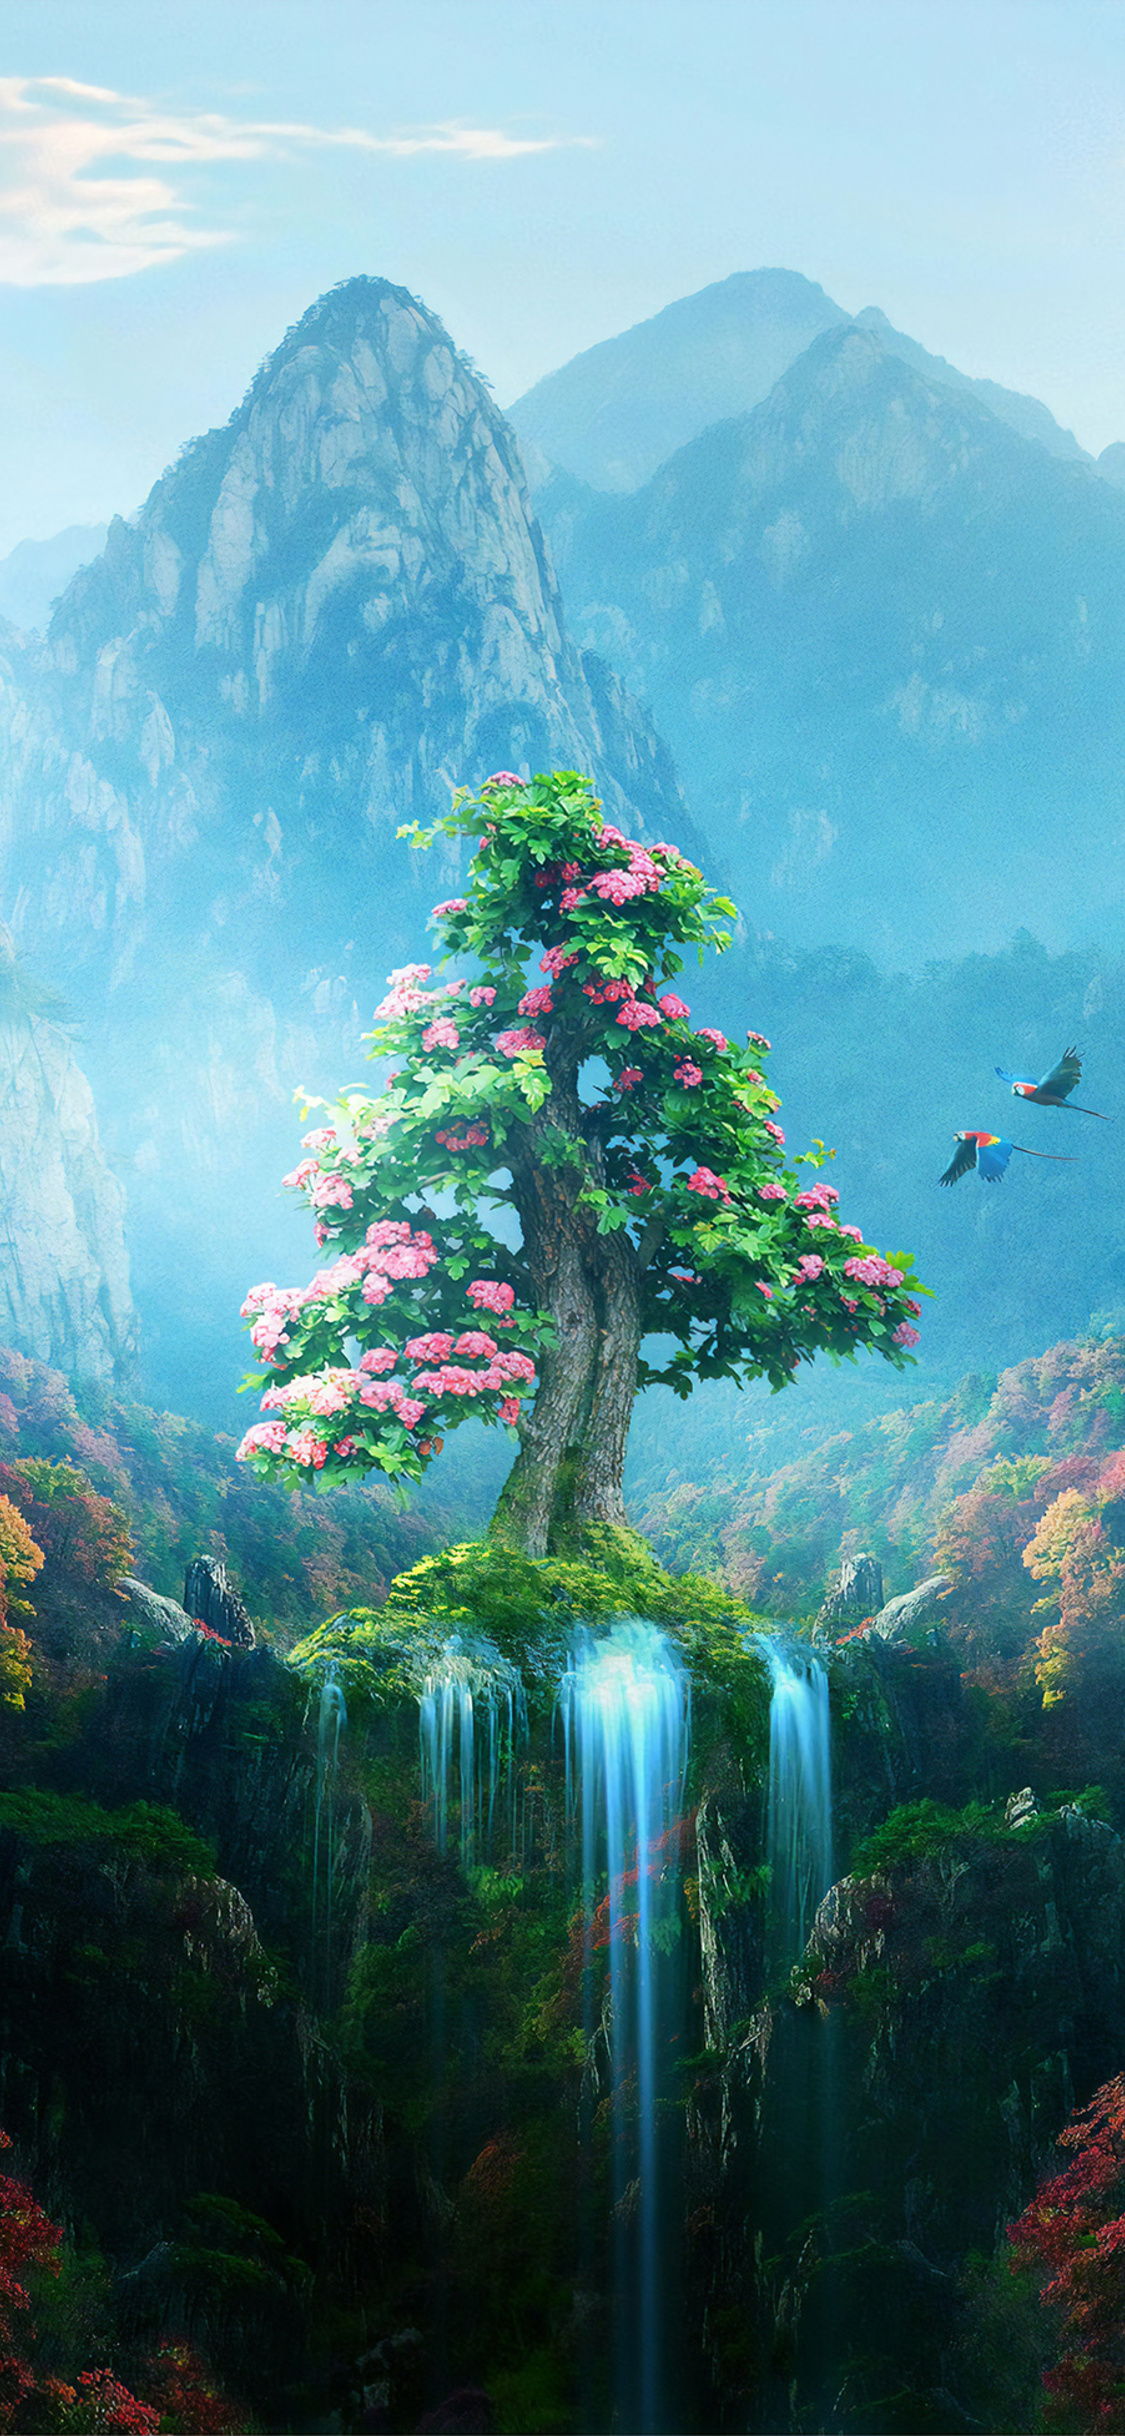 Enchanted Forest Wallpapers 62 images